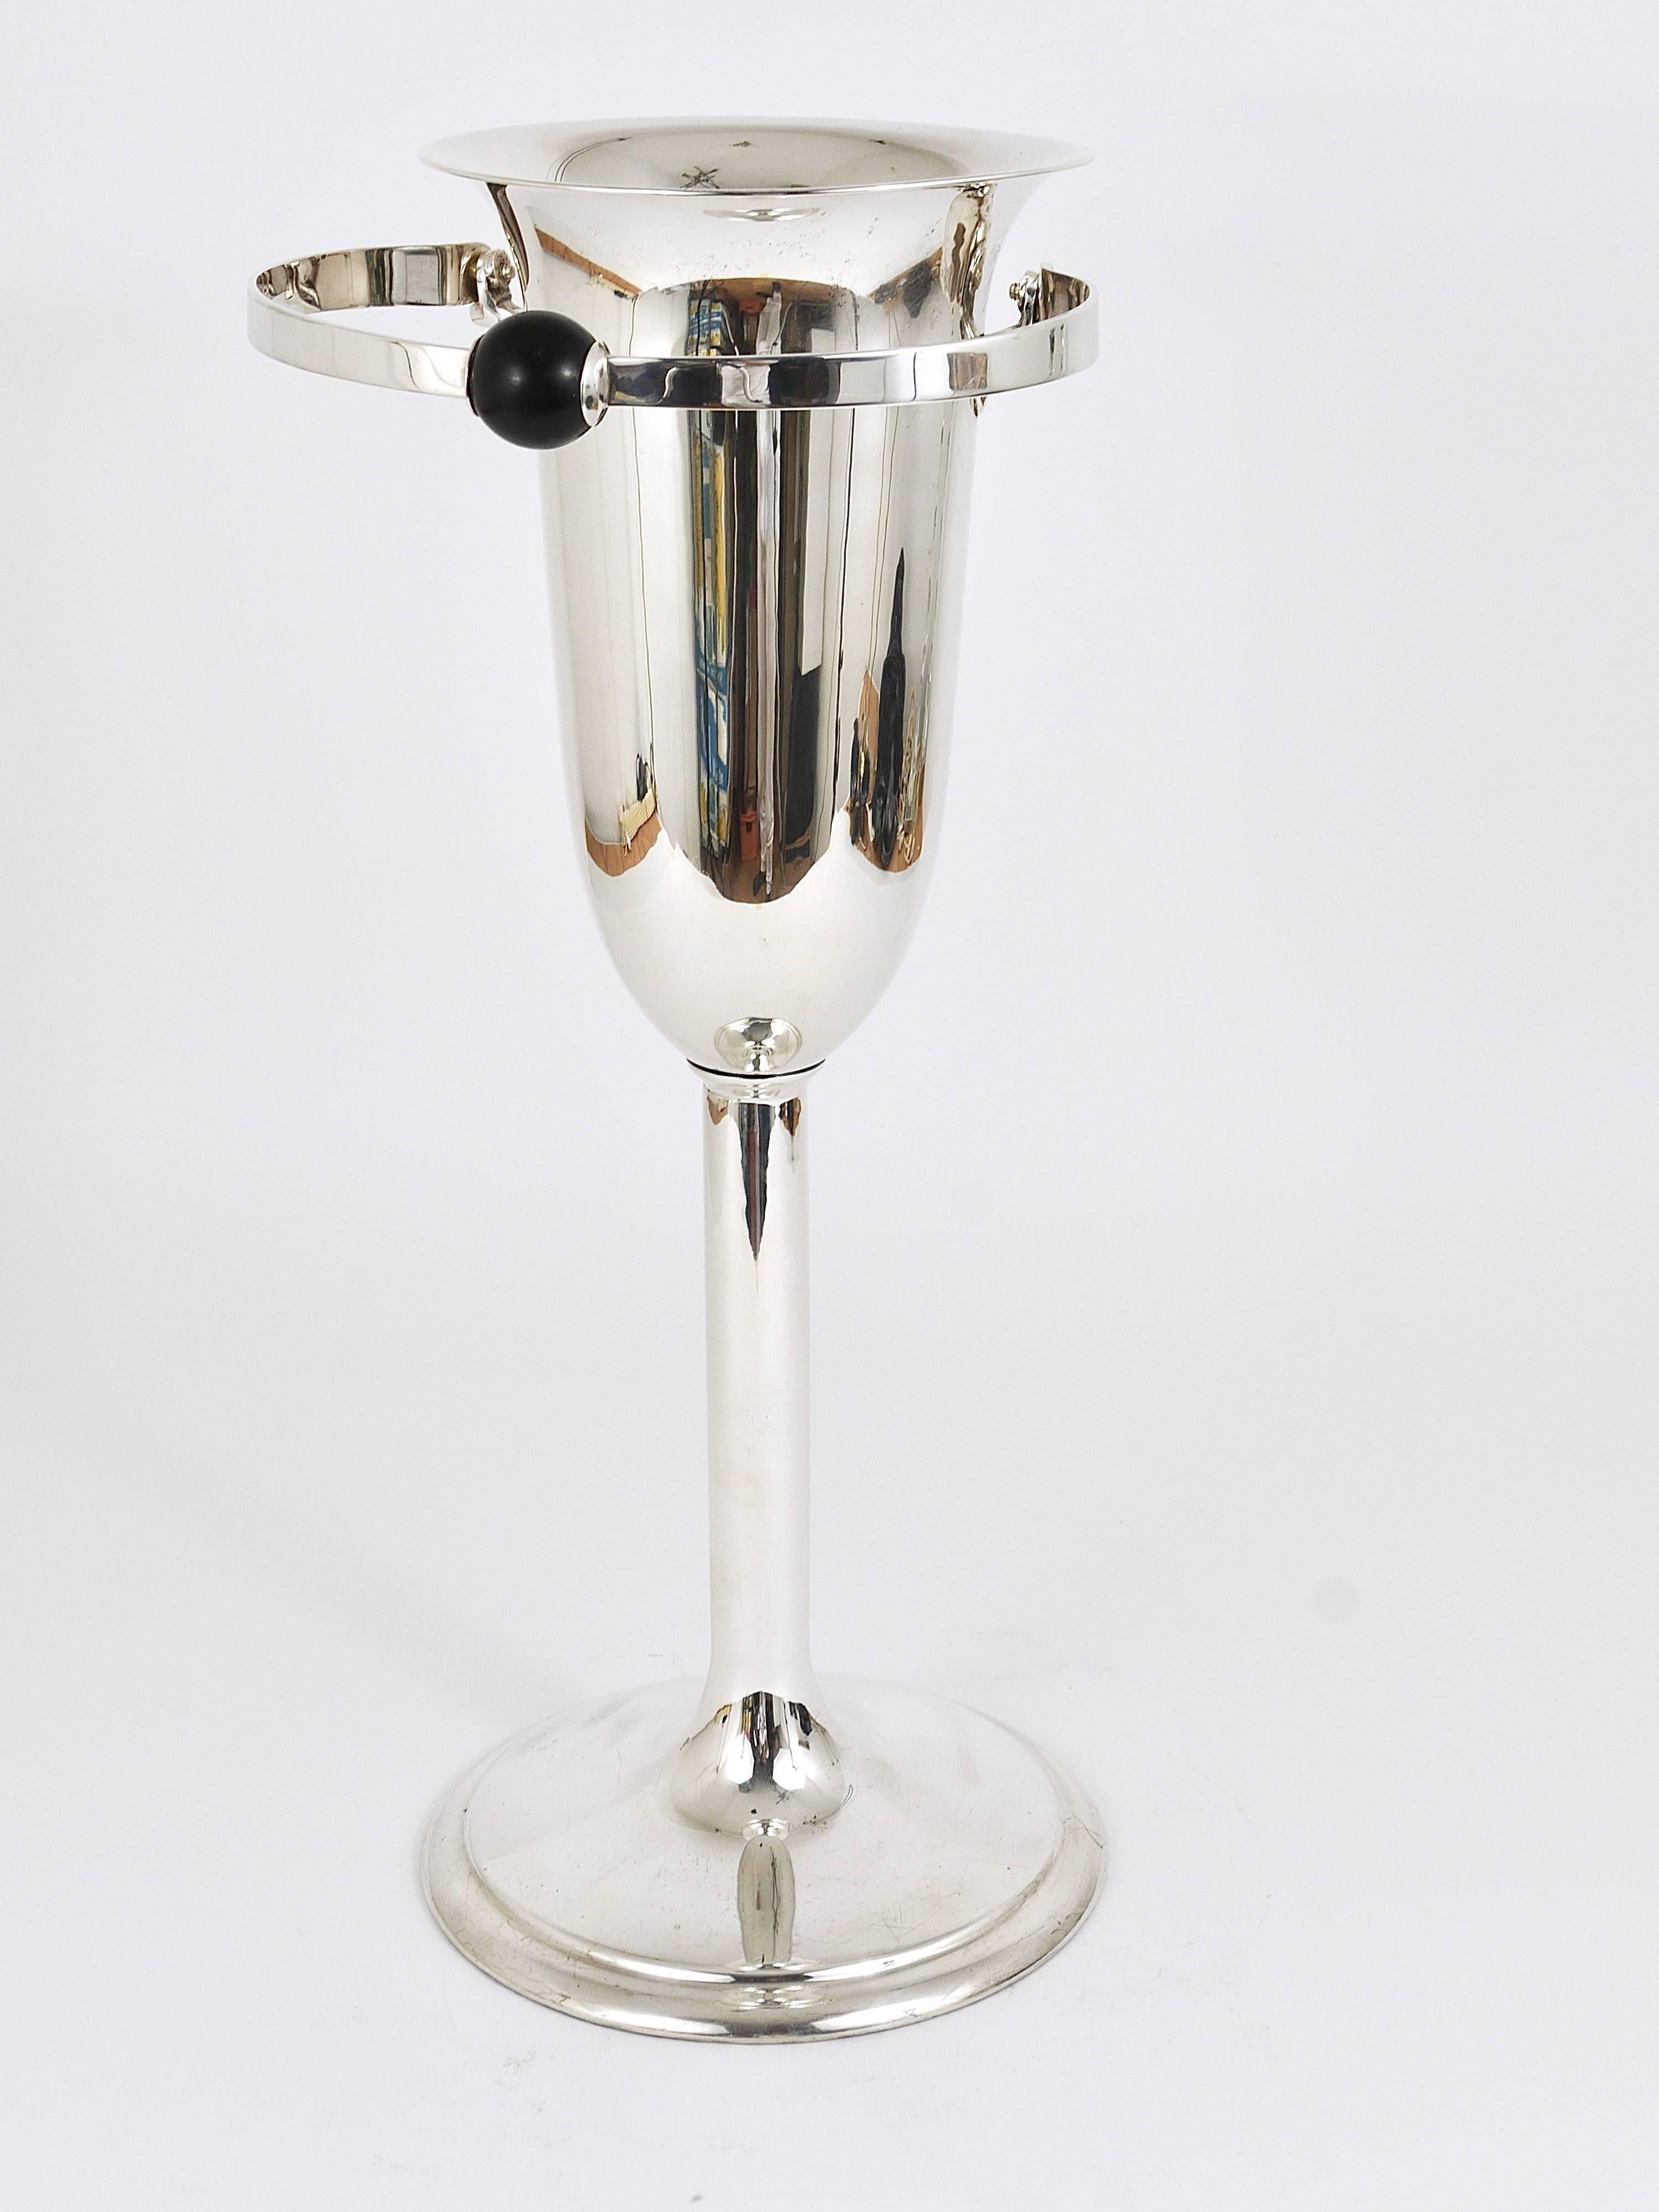 French Art Deco Floor Standing Wine orChampagne Cooler Ice Bucket, Silver, 1930s 1